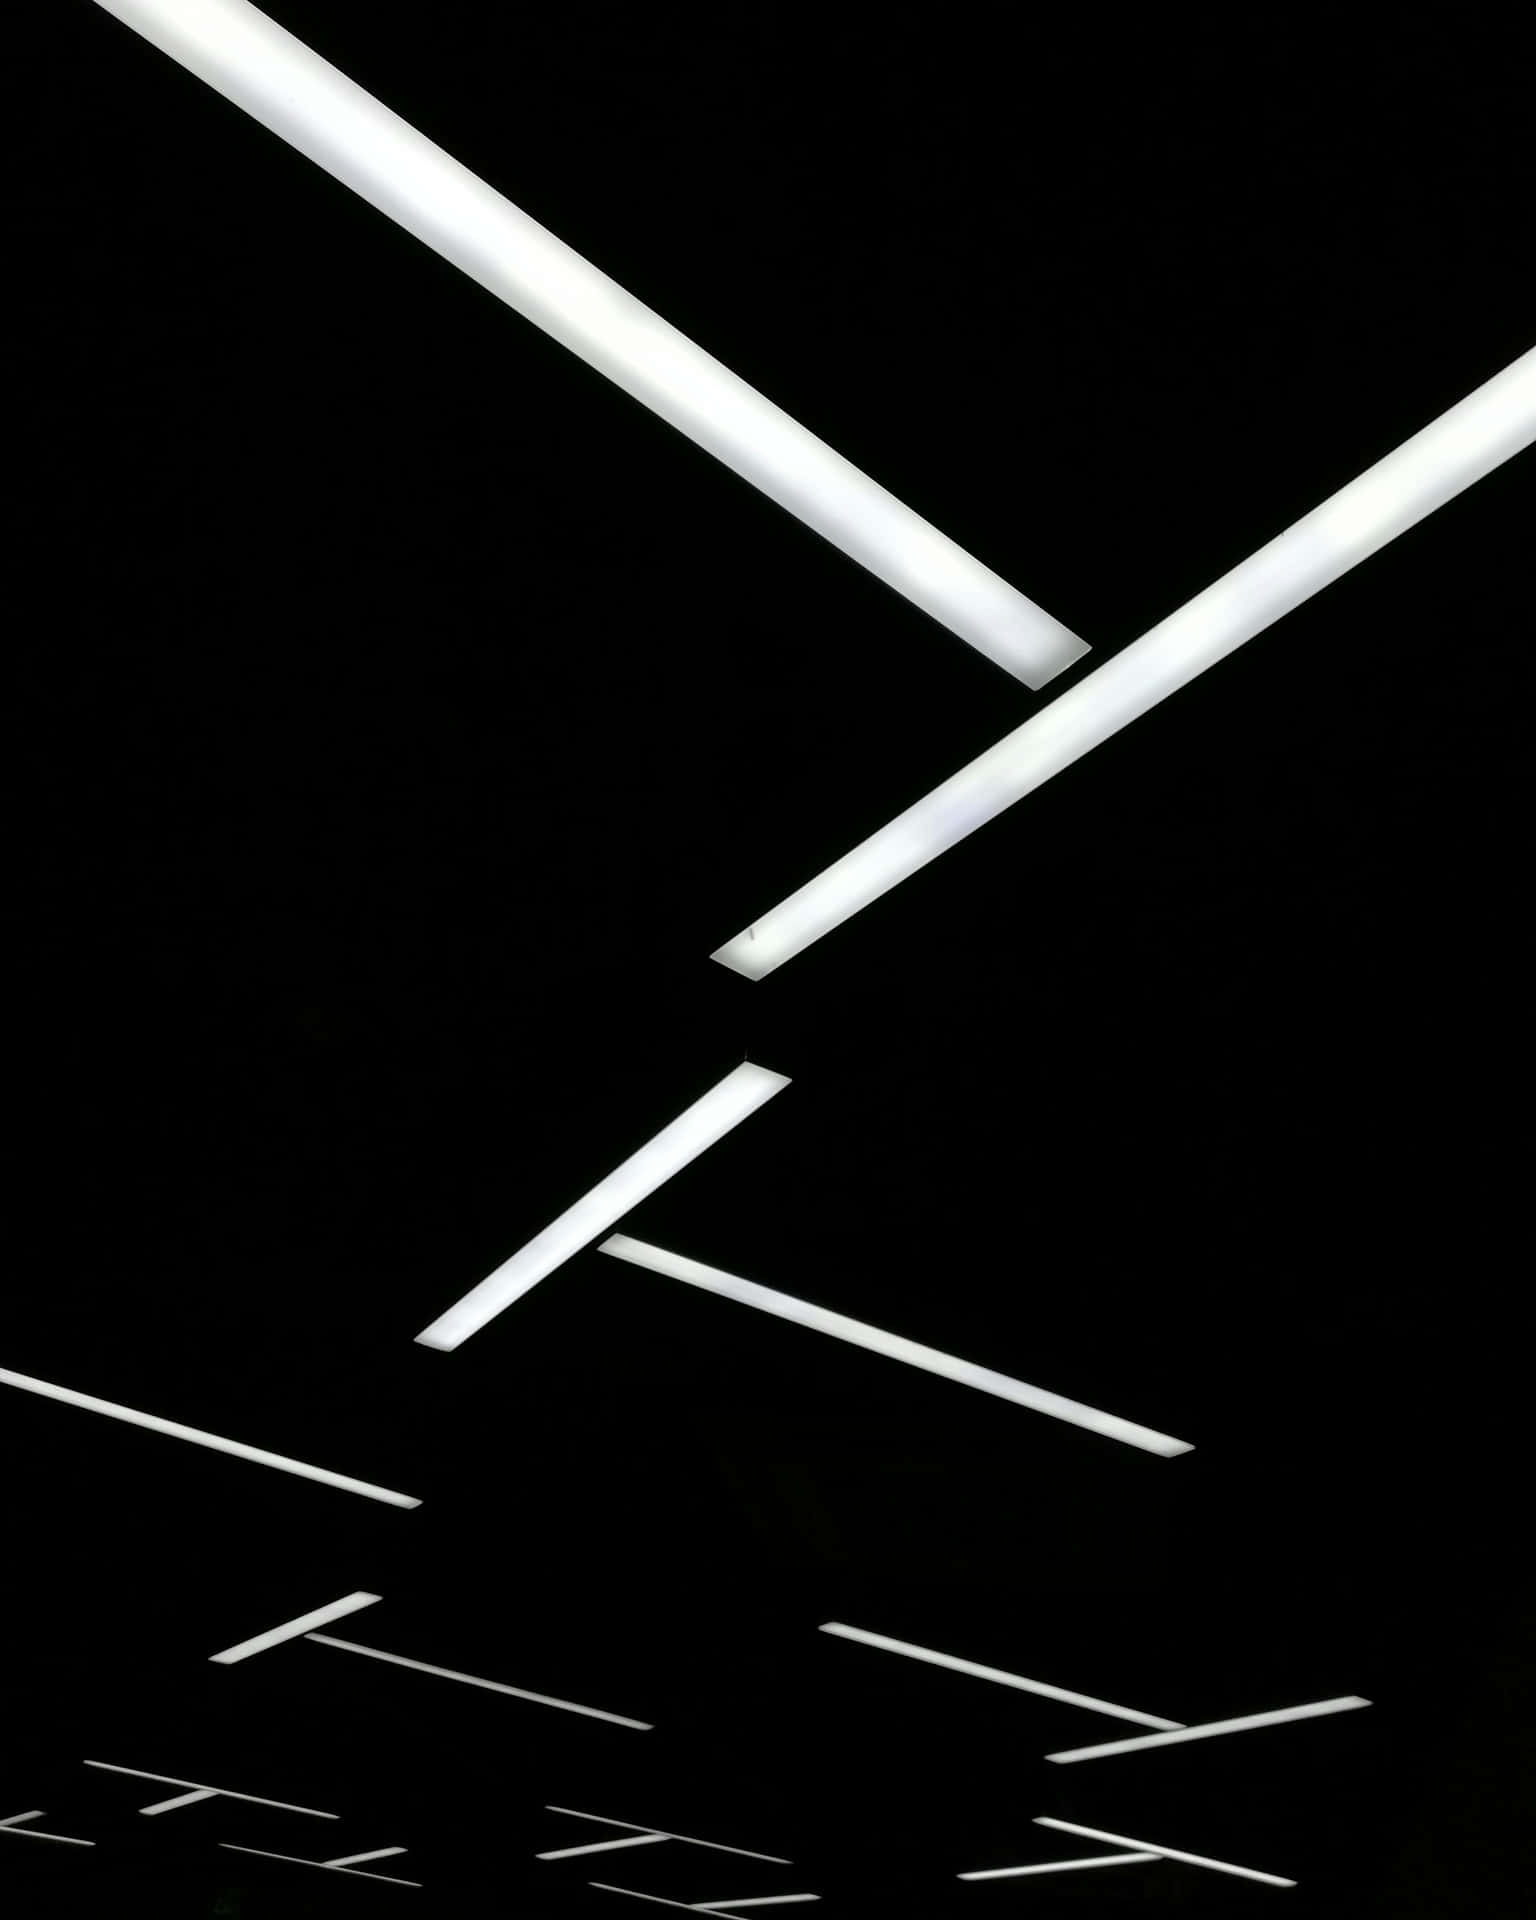 Abstract Fluorescent Lights Against Black Background Wallpaper